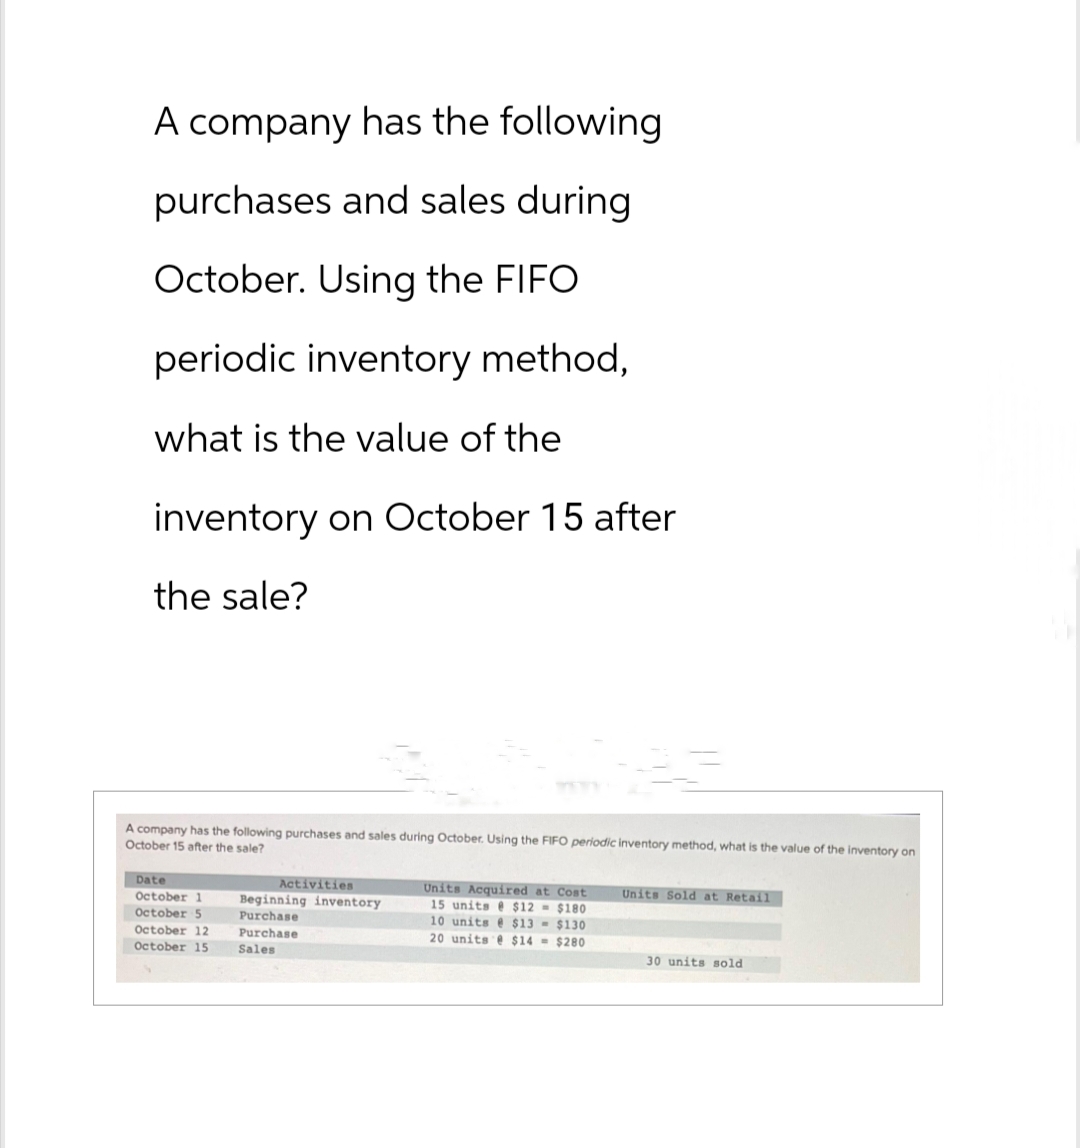 A company has the following
purchases and sales during
October. Using the FIFO
periodic inventory method,
what is the value of the
inventory on October 15 after
the sale?
A company has the following purchases and sales during October. Using the FIFO periodic inventory method, what is the value of the inventory on
October 15 after the sale?
Date
October 1
October 5
October 12
October 15
S
Activities
Beginning inventory
Purchase
Purchase
Sales
Units Acquired at Cost
15 units @ $12= $180
10 units @ $13- $130
20 units @ $14 $280
Units Sold at Retail
30 units sold